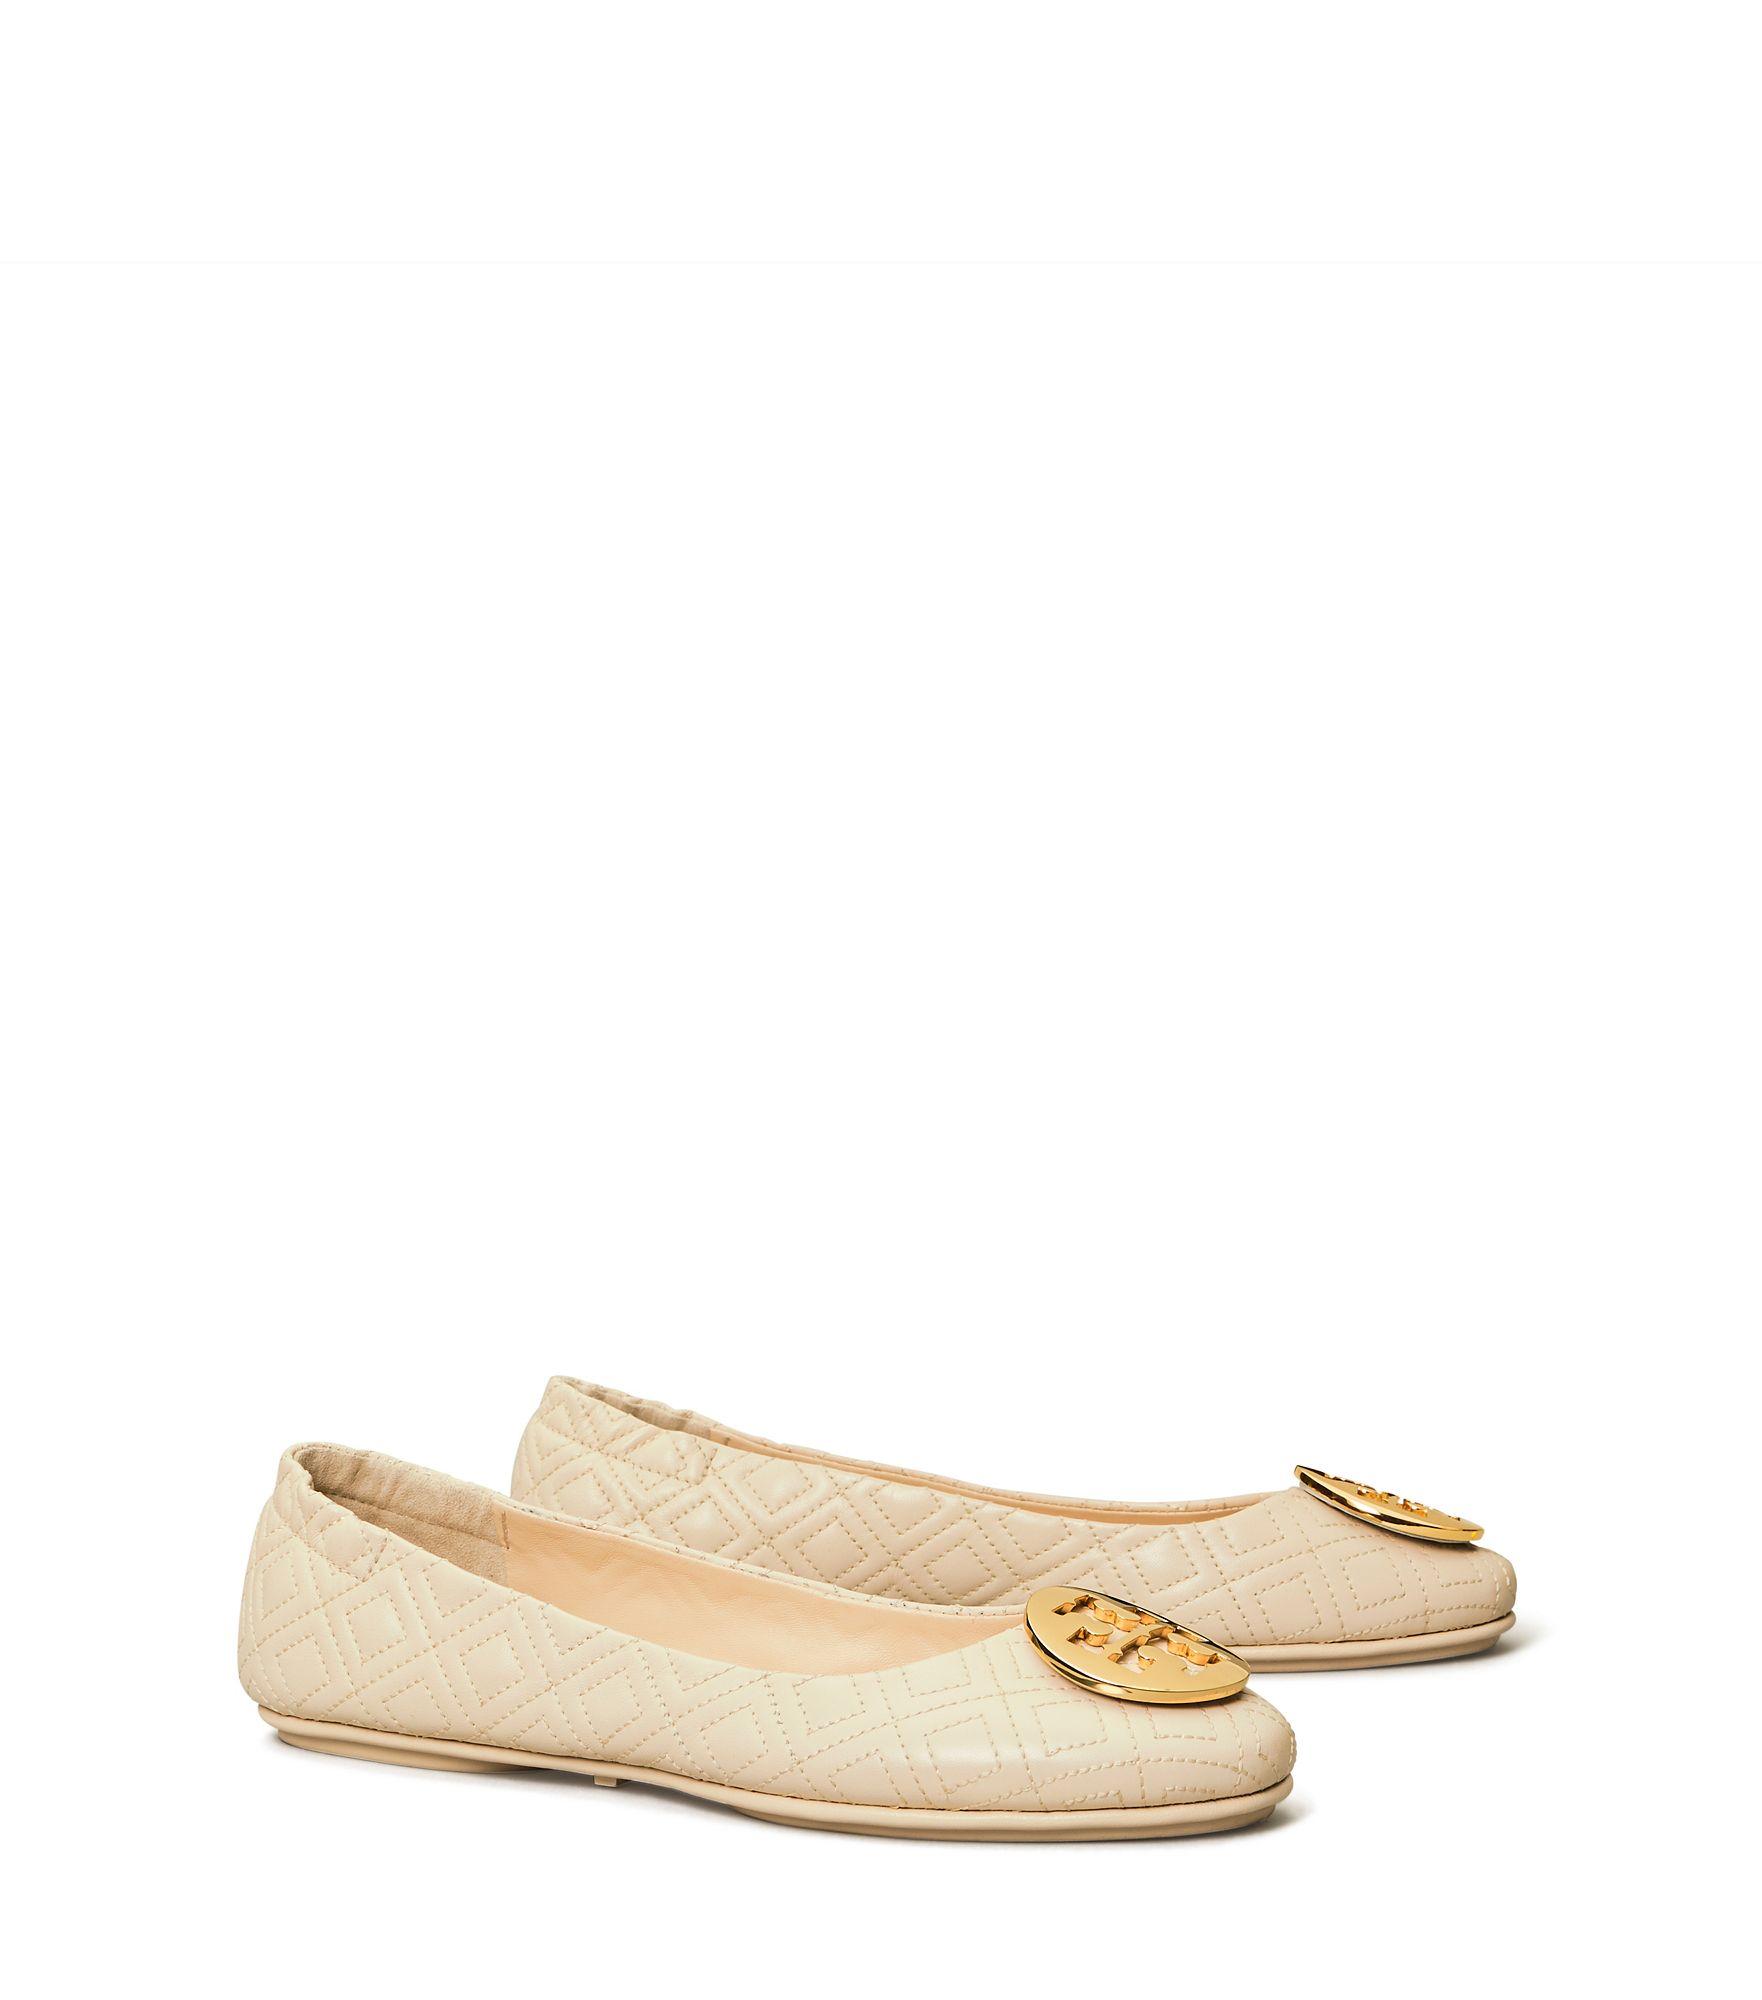 Tory Burch Minnie Travel Ballet Flats, Quilted Leather in Metallic | Lyst